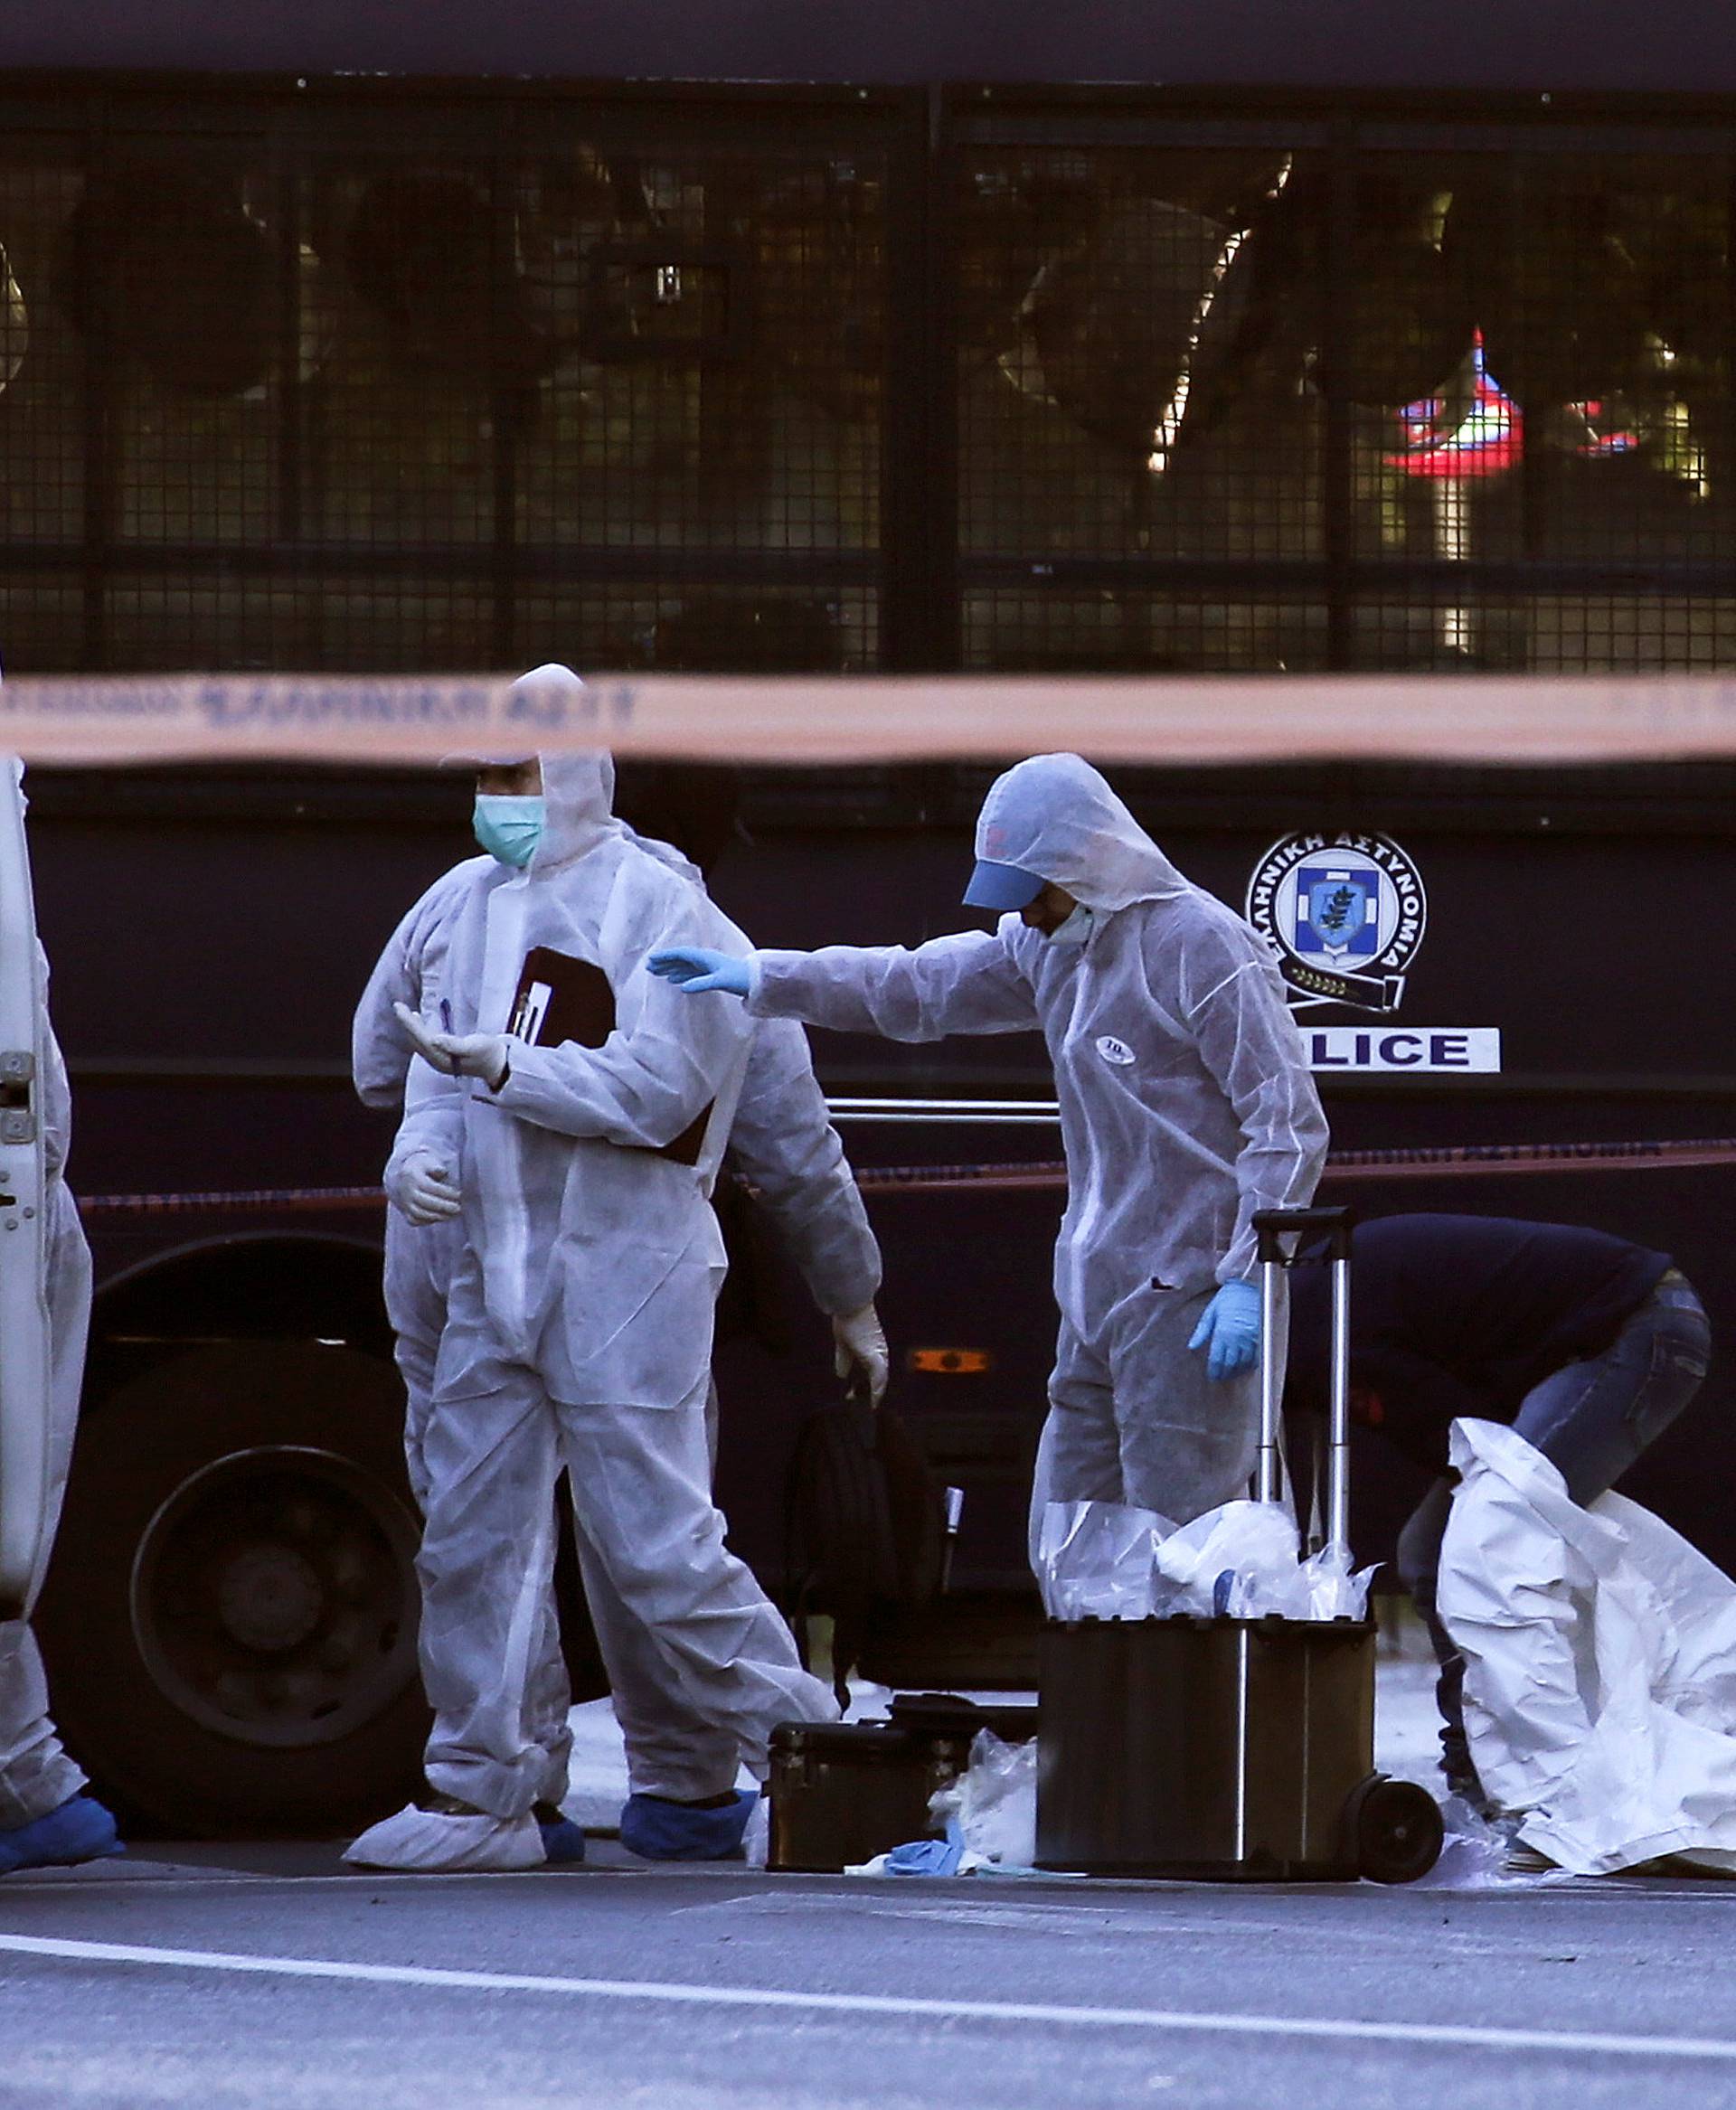 Forensics experts search for evidence outside the French Embassy, where unidentified attackers threw an explosive device which caused a small blast, in Athens